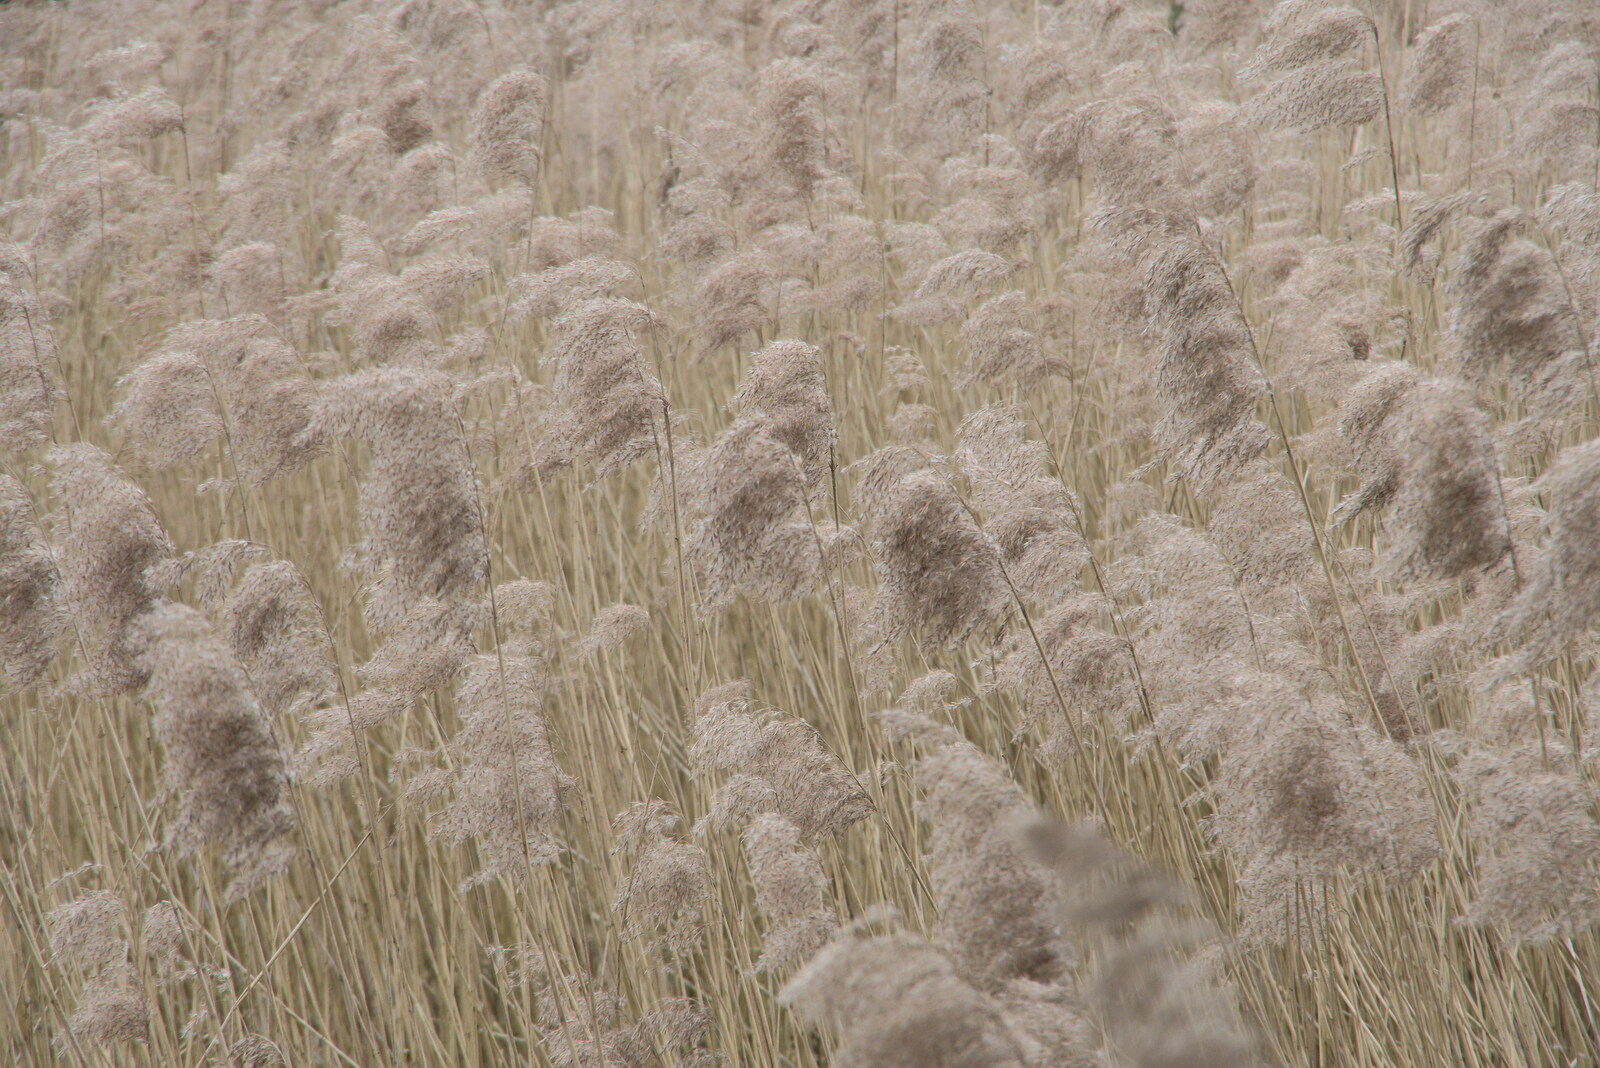 A field of pampas grass waves in the wind from A Return to Bressingham Steam and Gardens, Bressingham, Norfolk - 28th March 2021